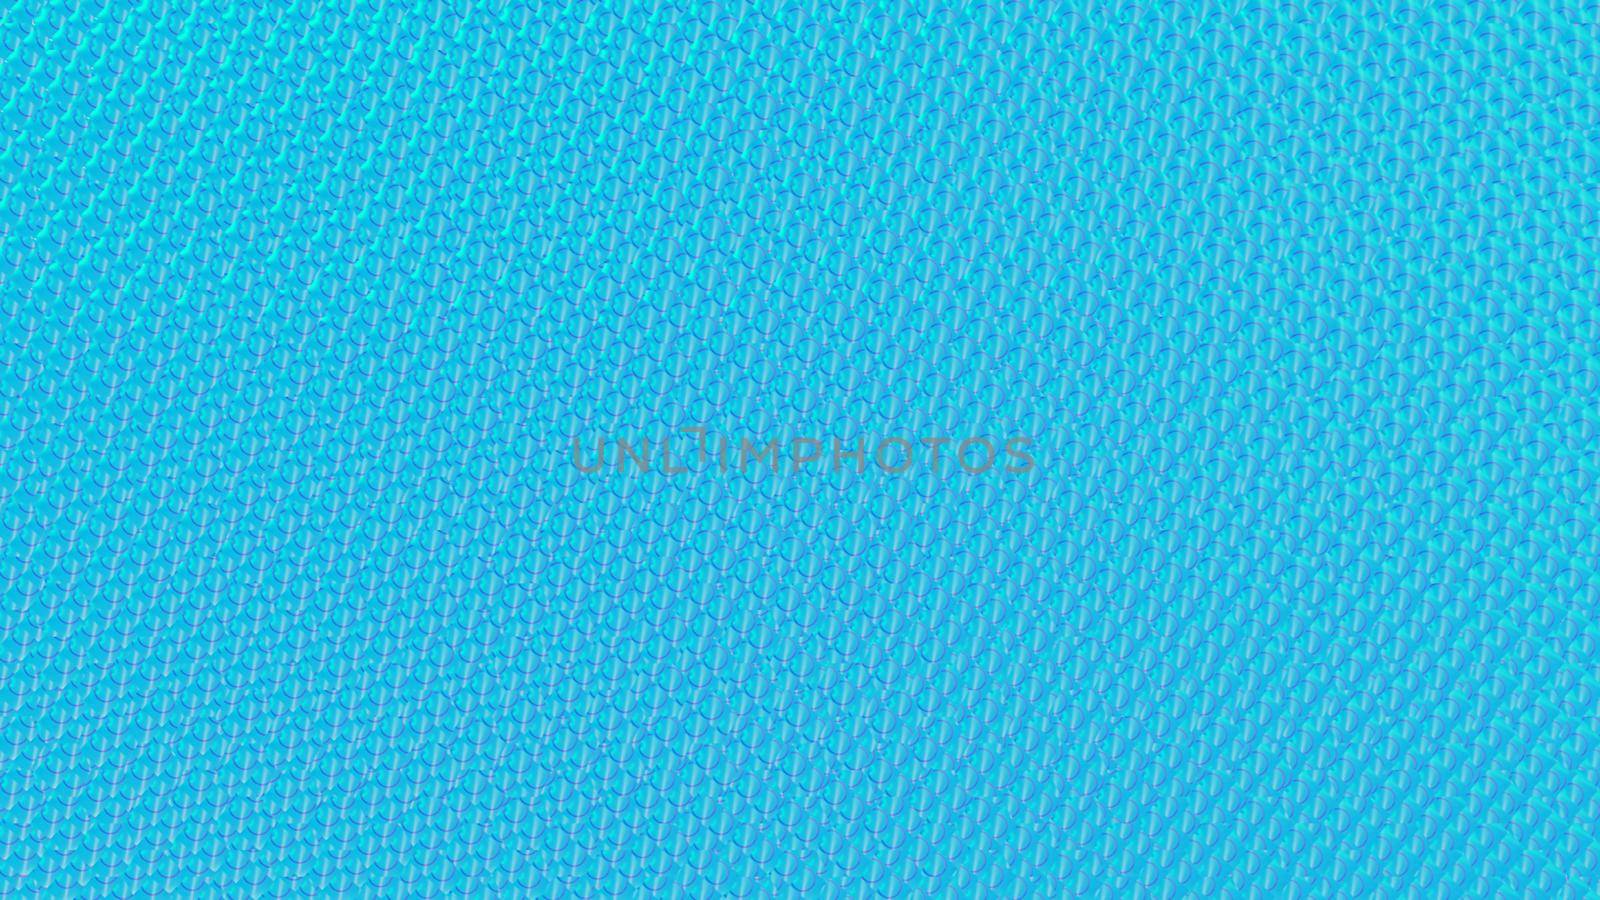 Abstract textured blue background with bubble texture